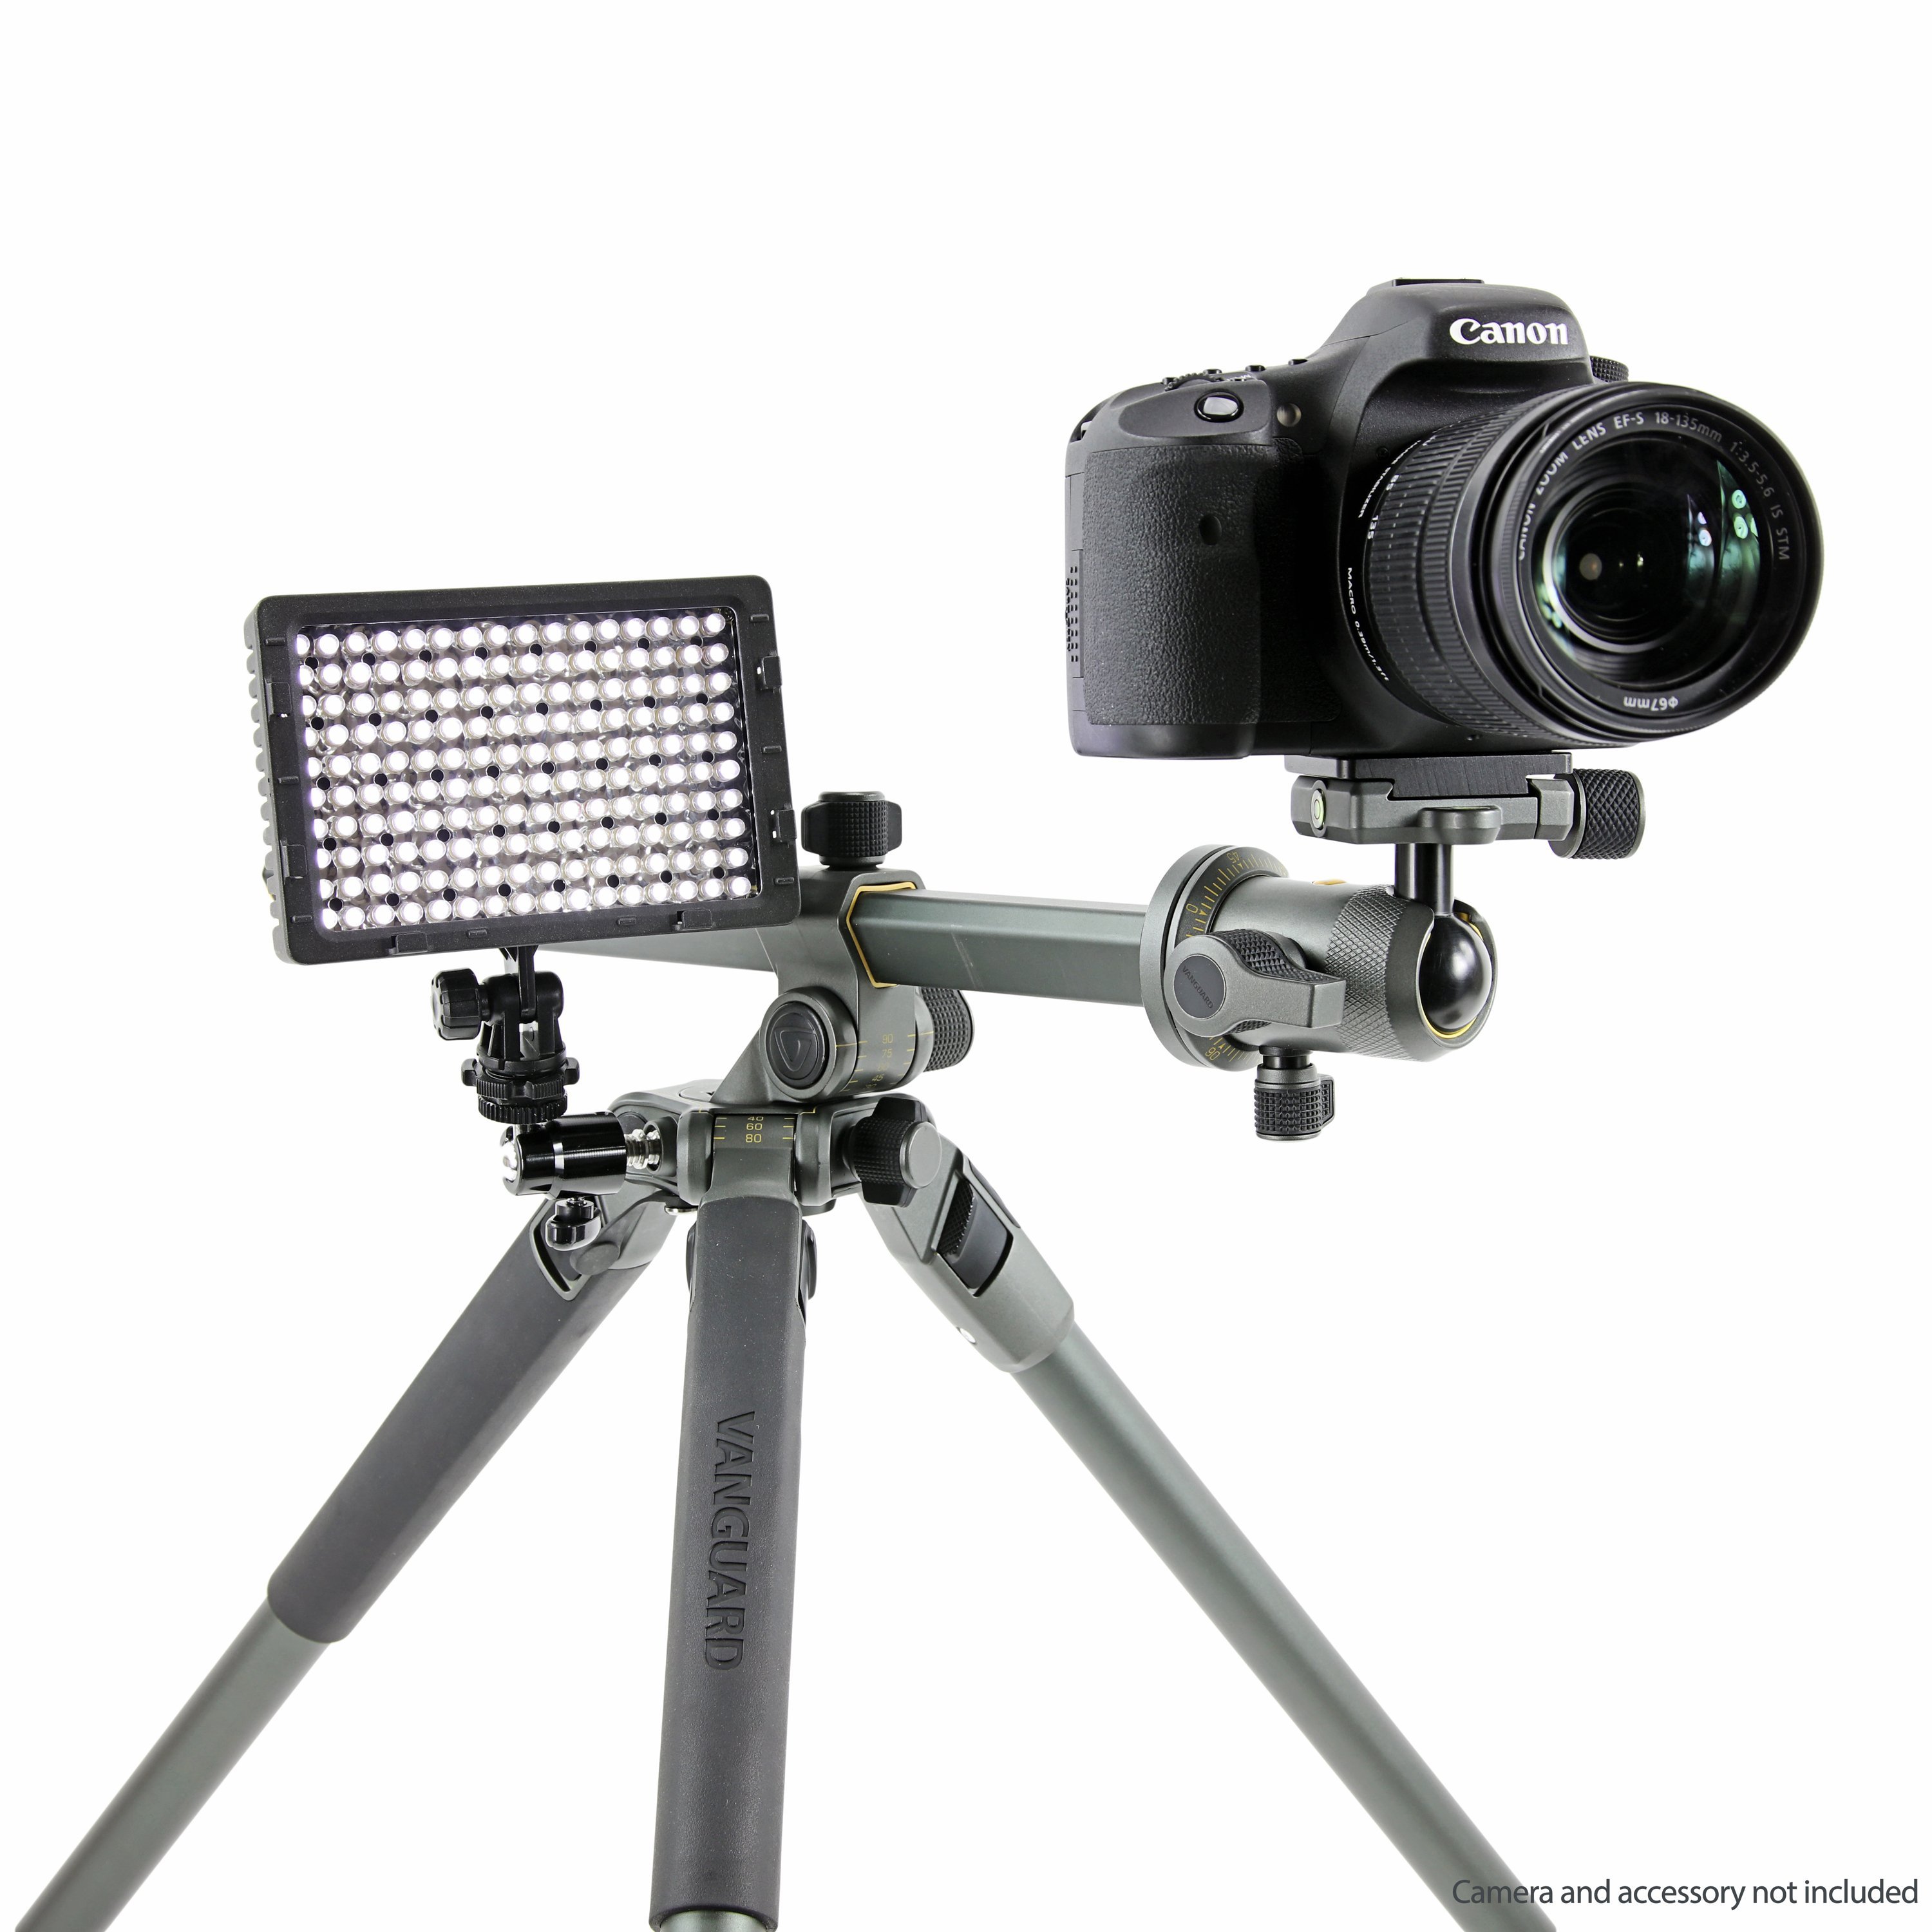 TThumbnail image for Vanguard Alta Pro 2+ 263AB tripod with BH100 head